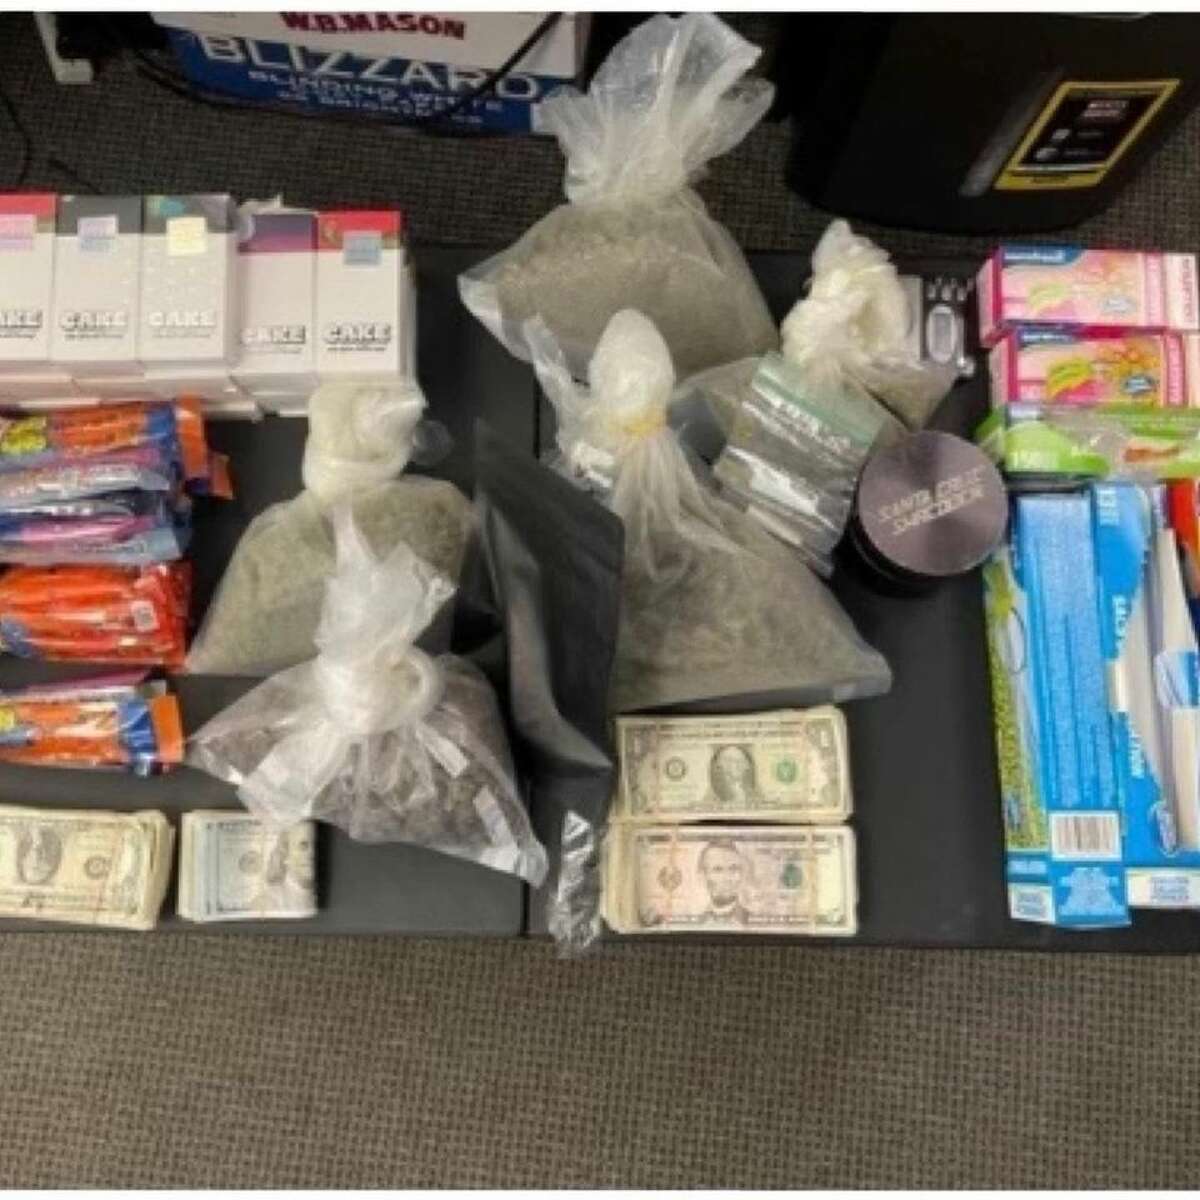 Two people were arrested Wednesday after multiple searches turned up drugs, fake IDs, narcotics paraphernalia and other illegal items, according to Norwalk police.